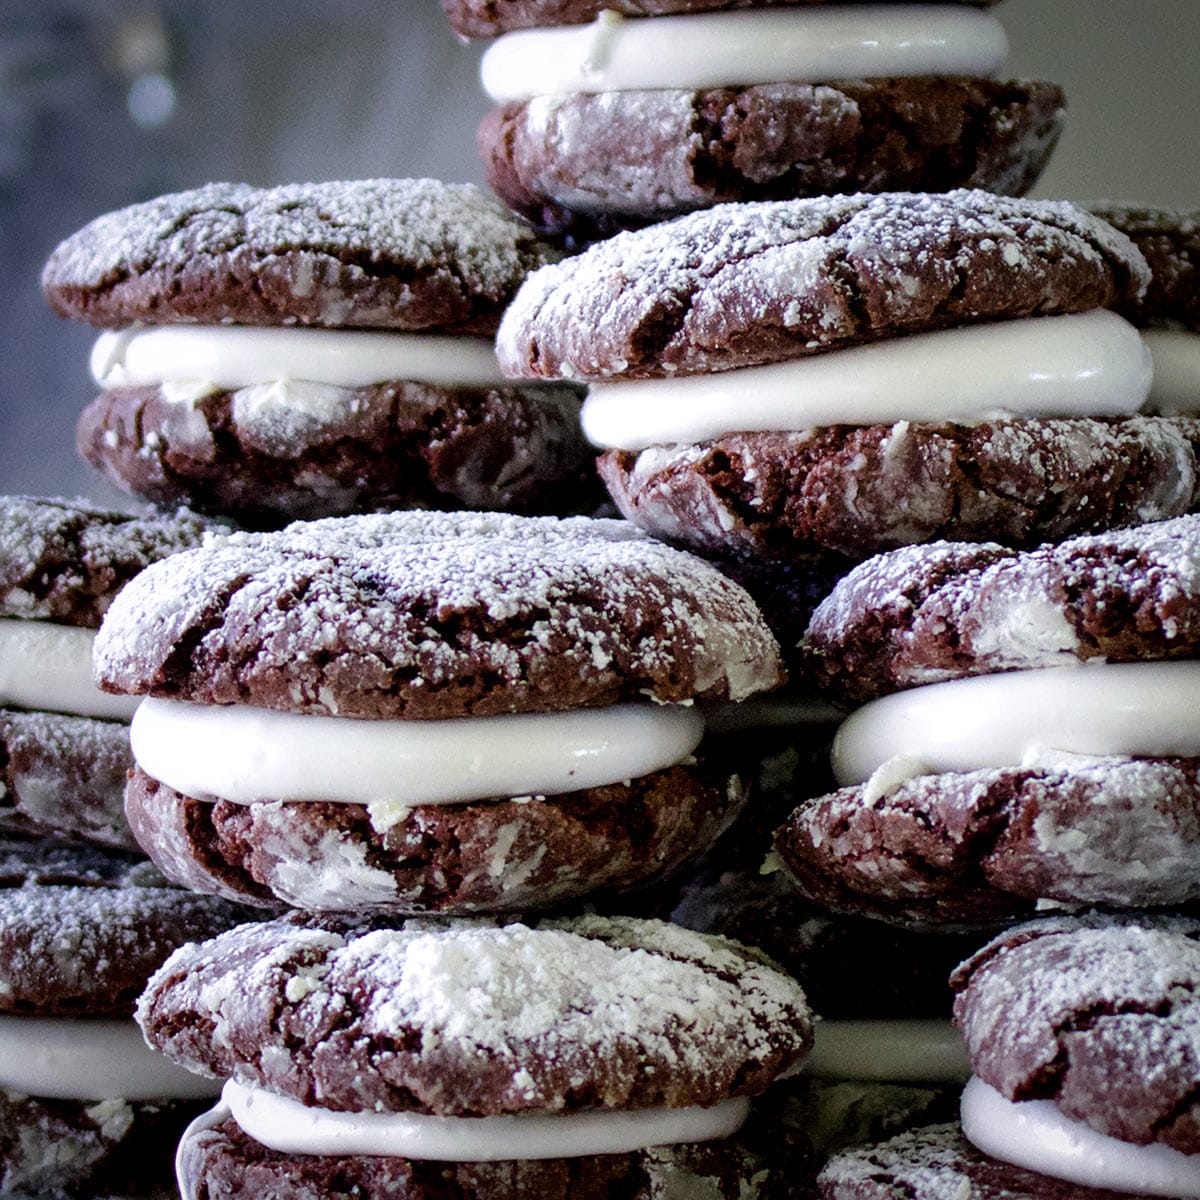 A platter piled high with marshmallow chocolate crinkle cookies.